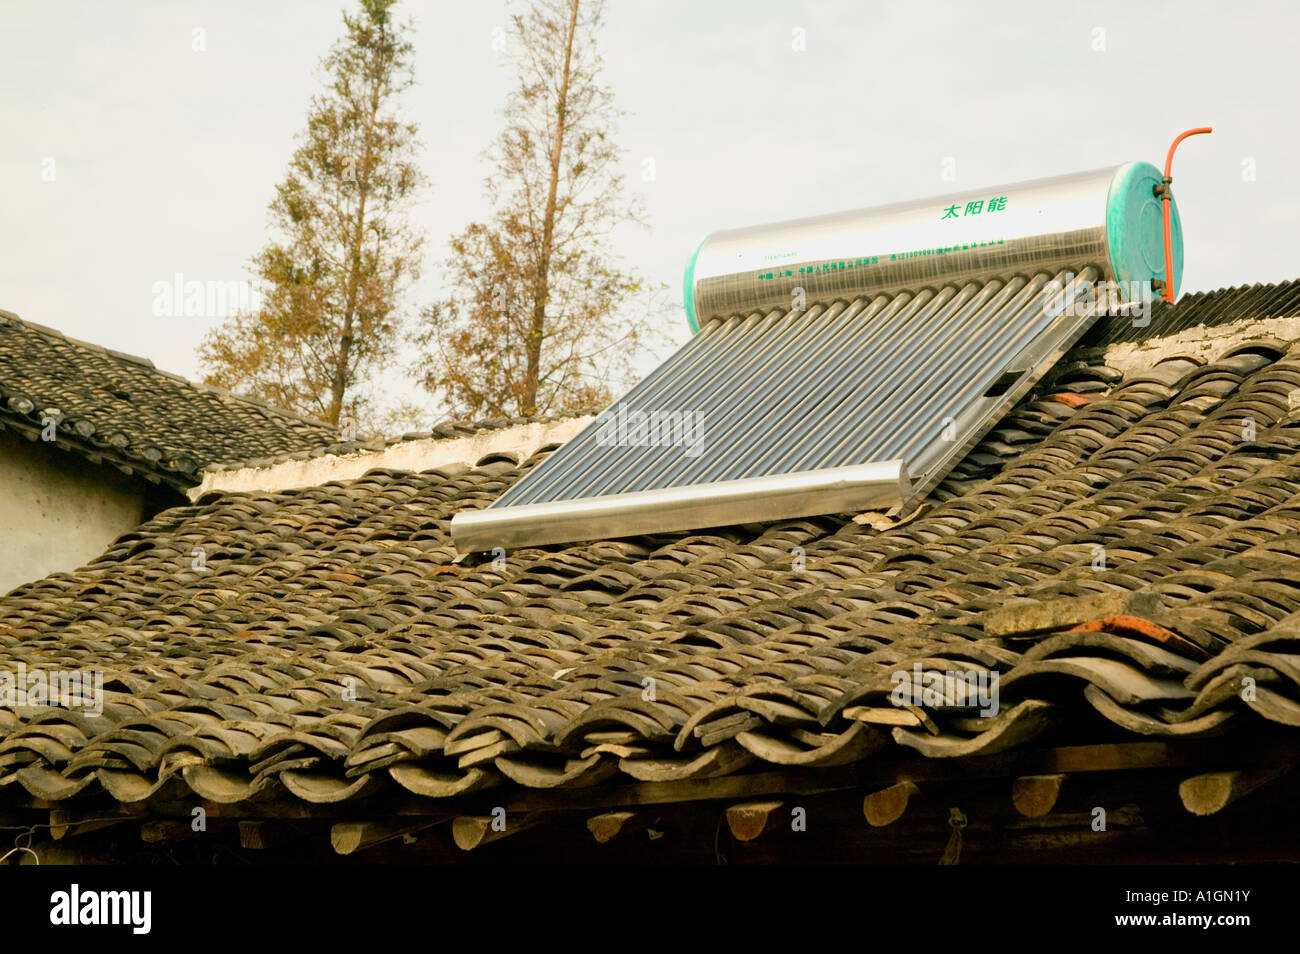 Solar water heater on tiled roof, Xitang, Ancient Water Village, China Stock Photo